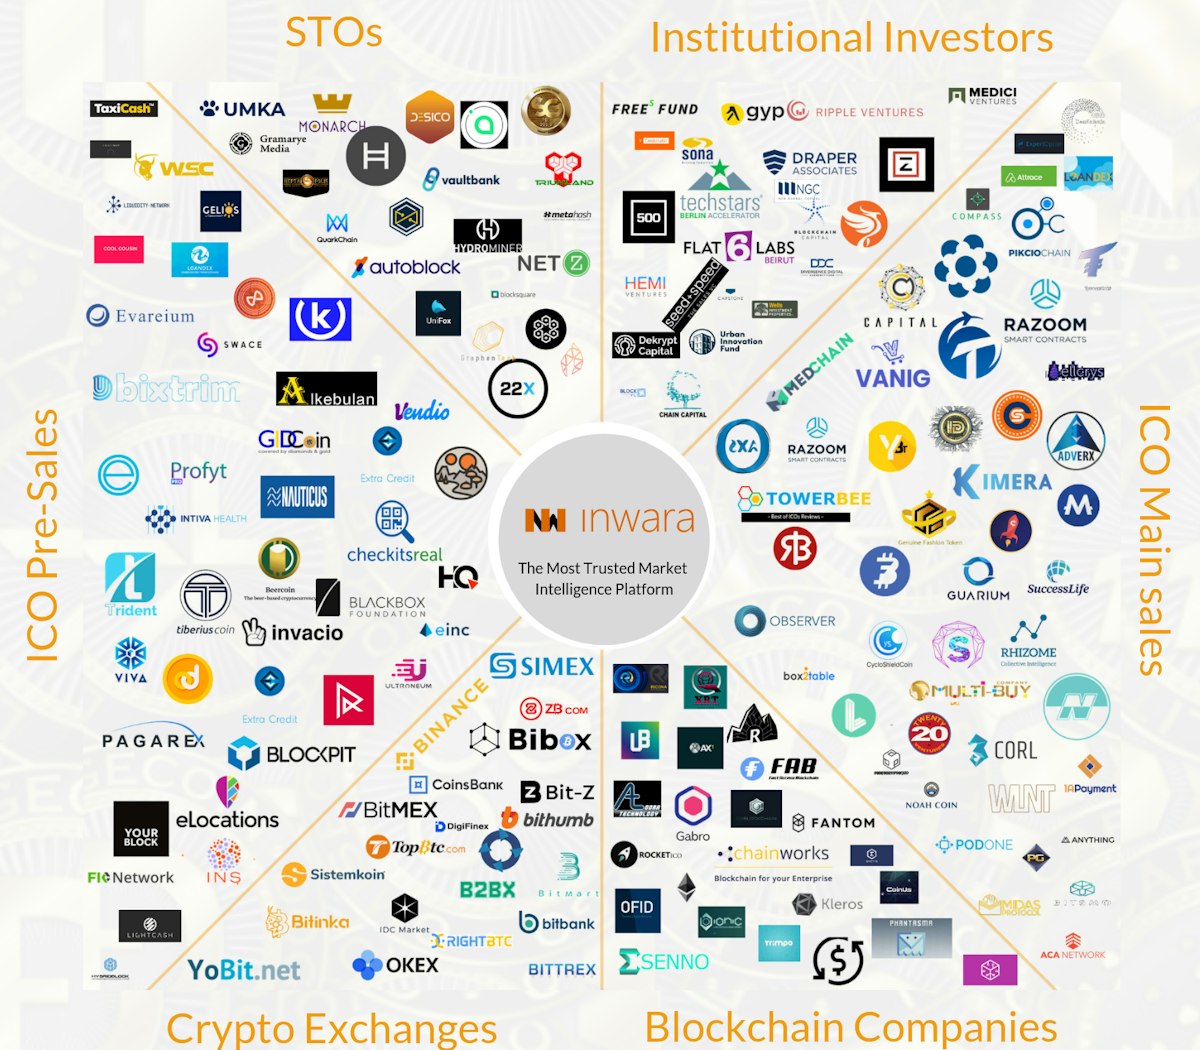 featured image - 2018 was Good for STOs, but Challenging for ICOs & Bitcoin Tanks